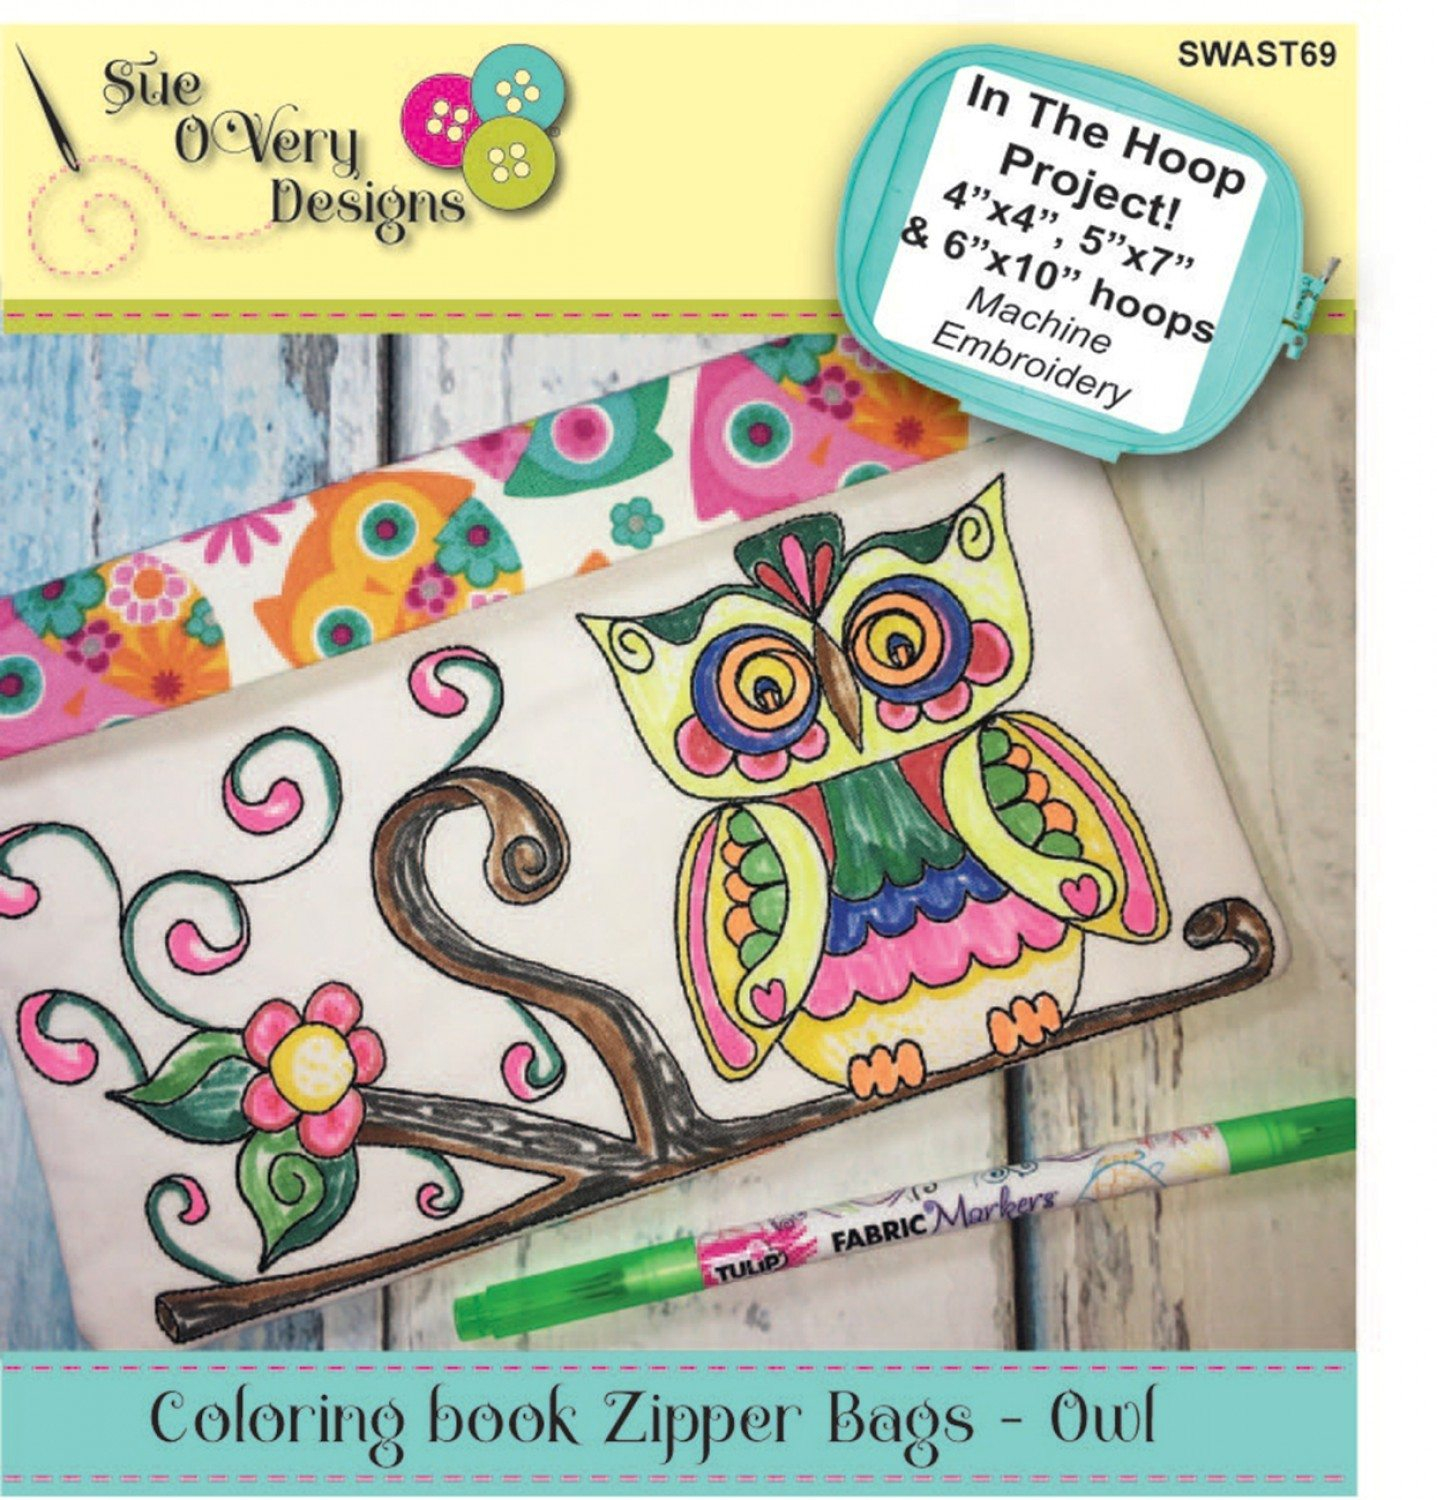 Fun Embroidery Patterns Sue Overy Designs Owl Coloring Book Zipper Bags In The Hoop Embroidery Cd